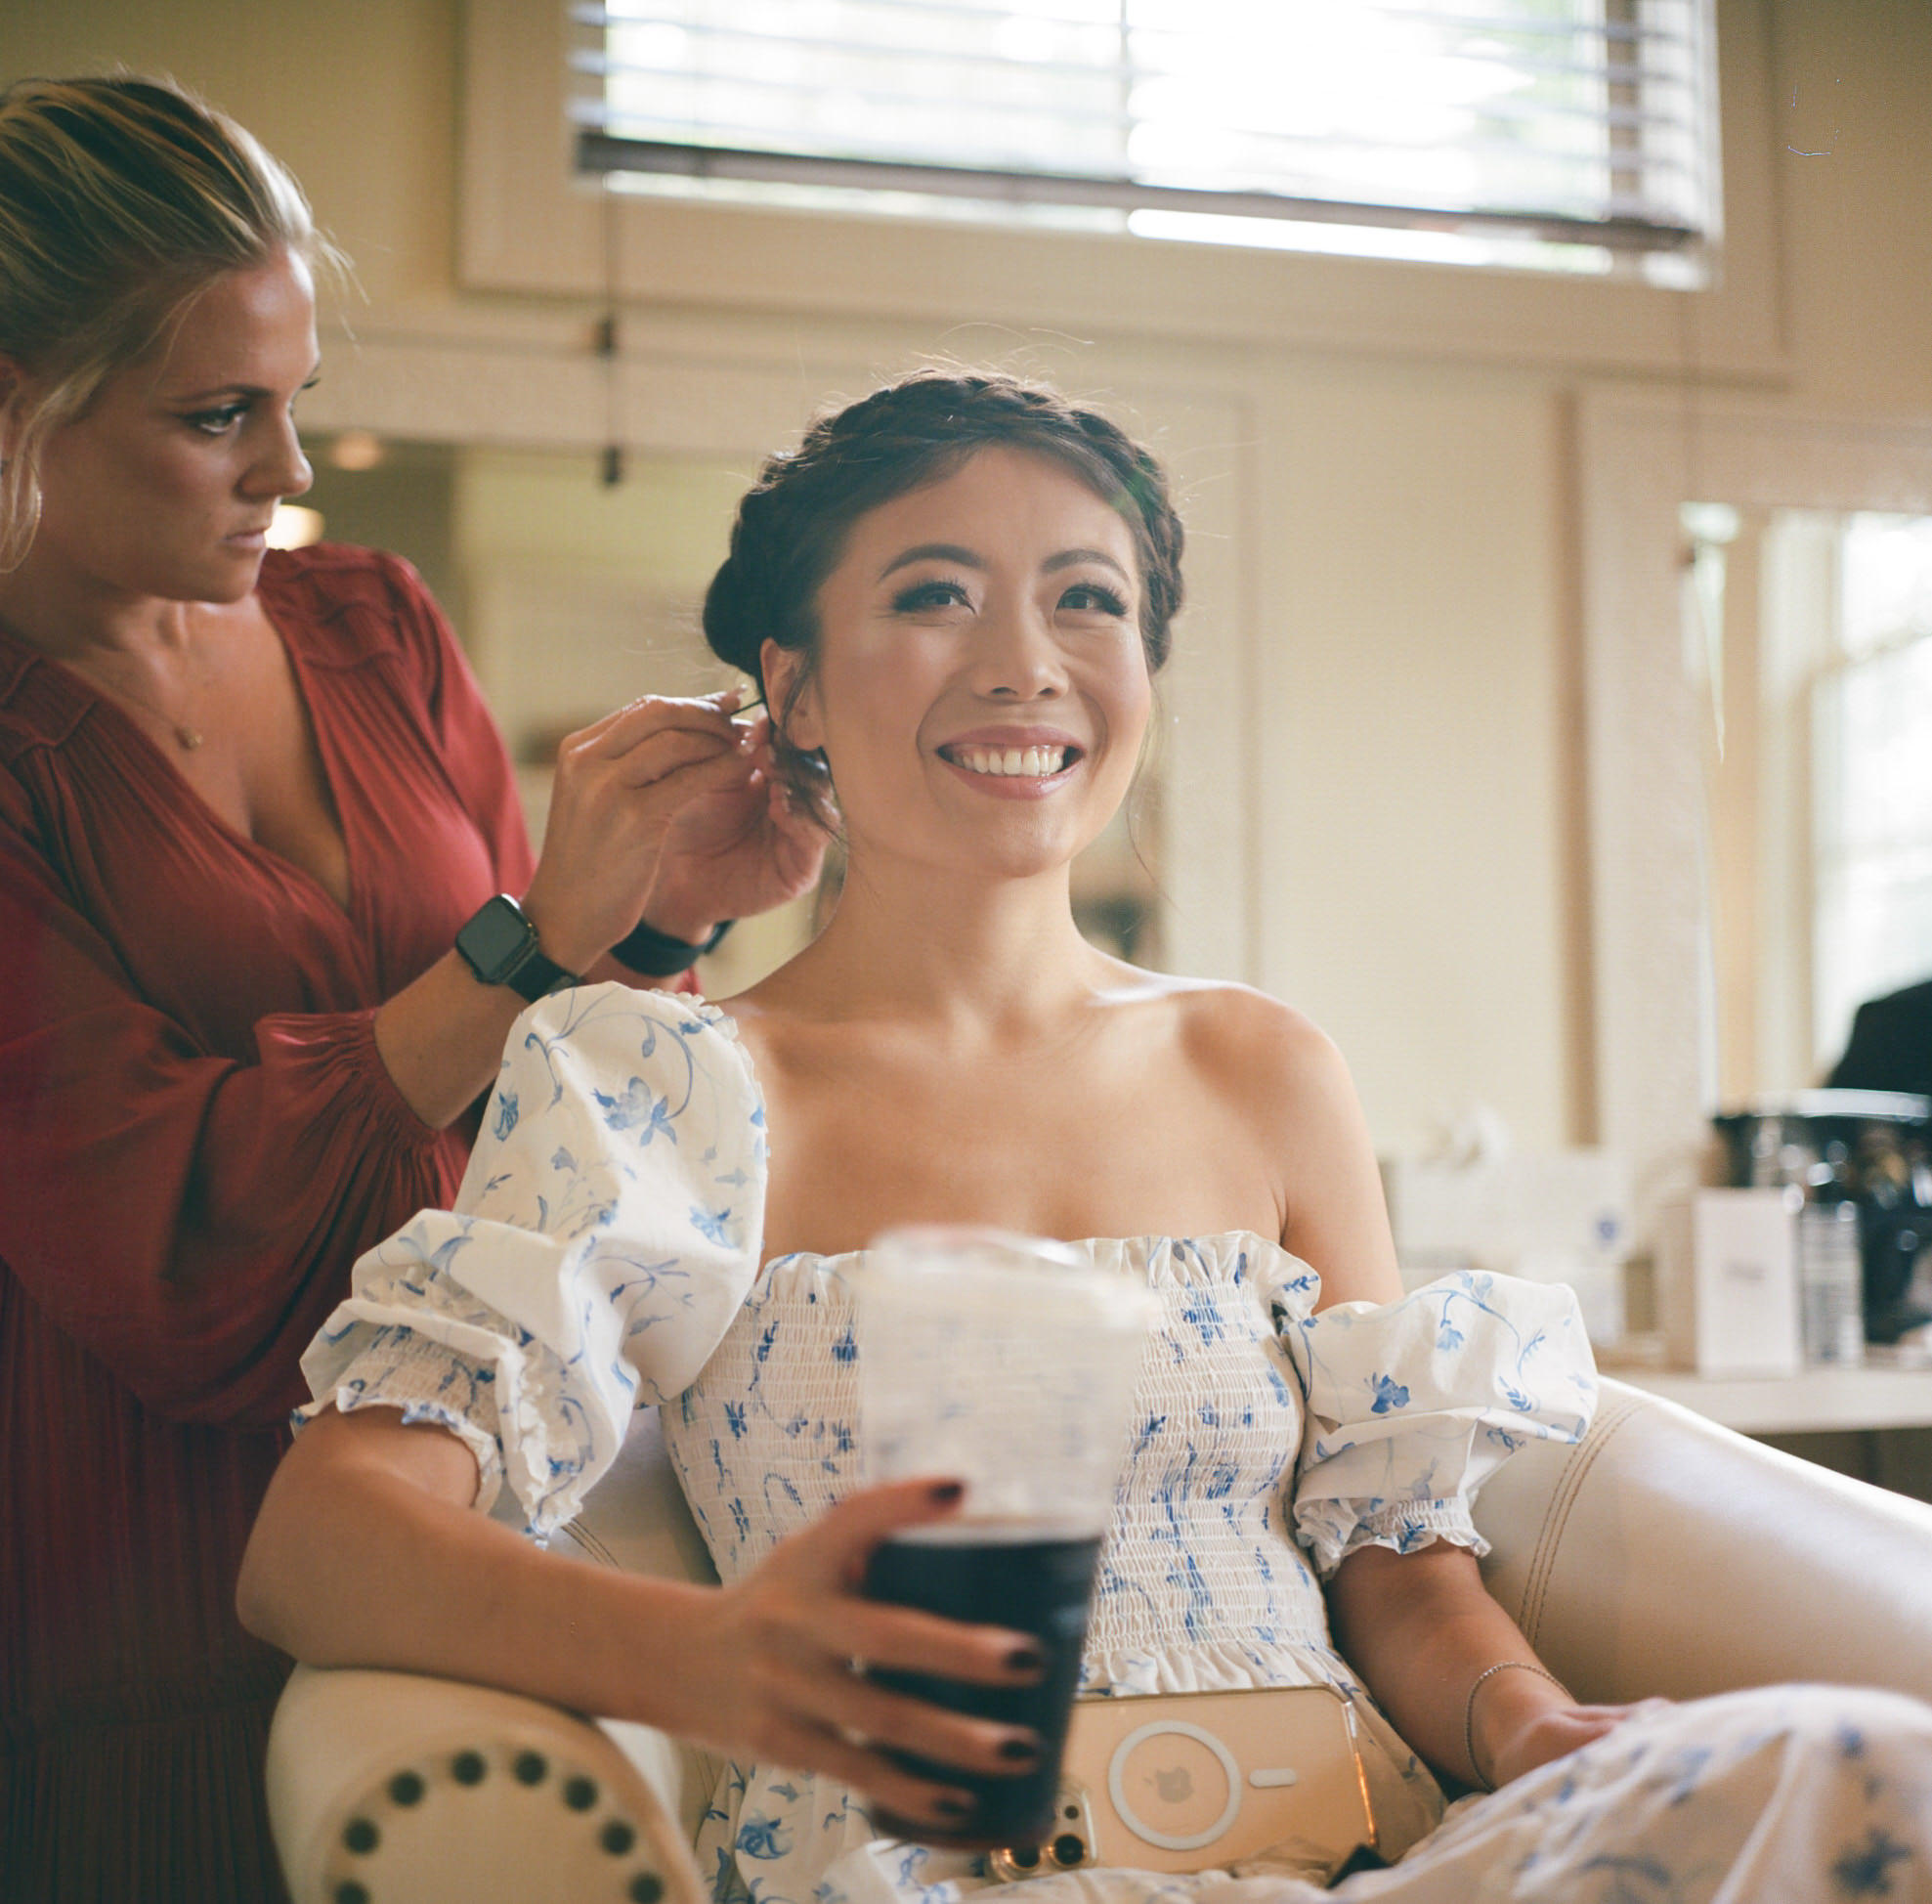 Editorial photo of the bride getting ready. Film wedding photography image by Jenny Fu Studio